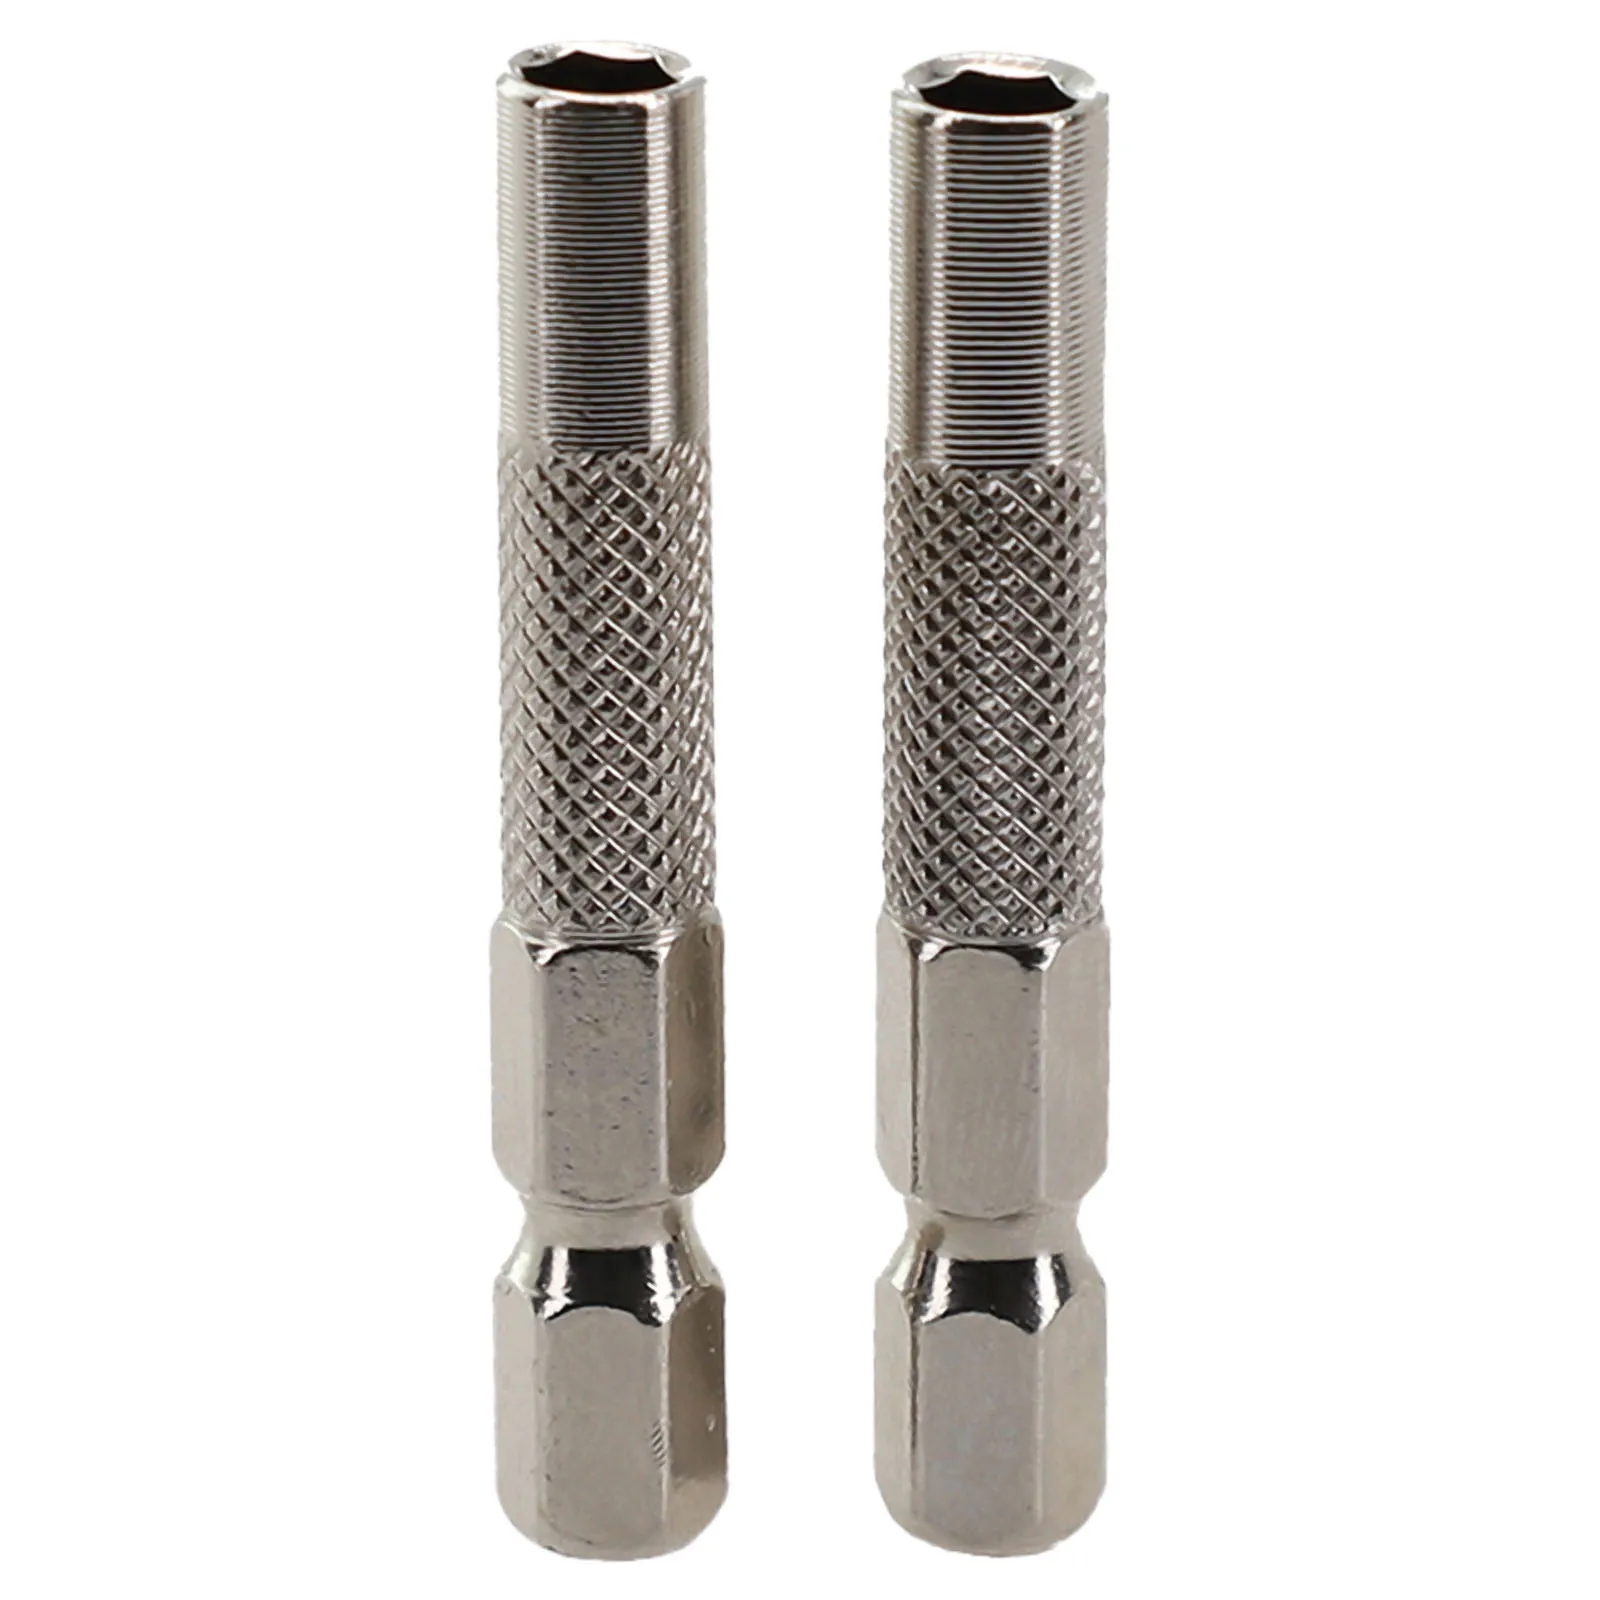 

2pcs Hex Shank 6.35 Mm Insert Bits Adapters To 4mm Electric Screwdriver Sockets Holder Micro Bits Adapter Magnetic Holder Tools